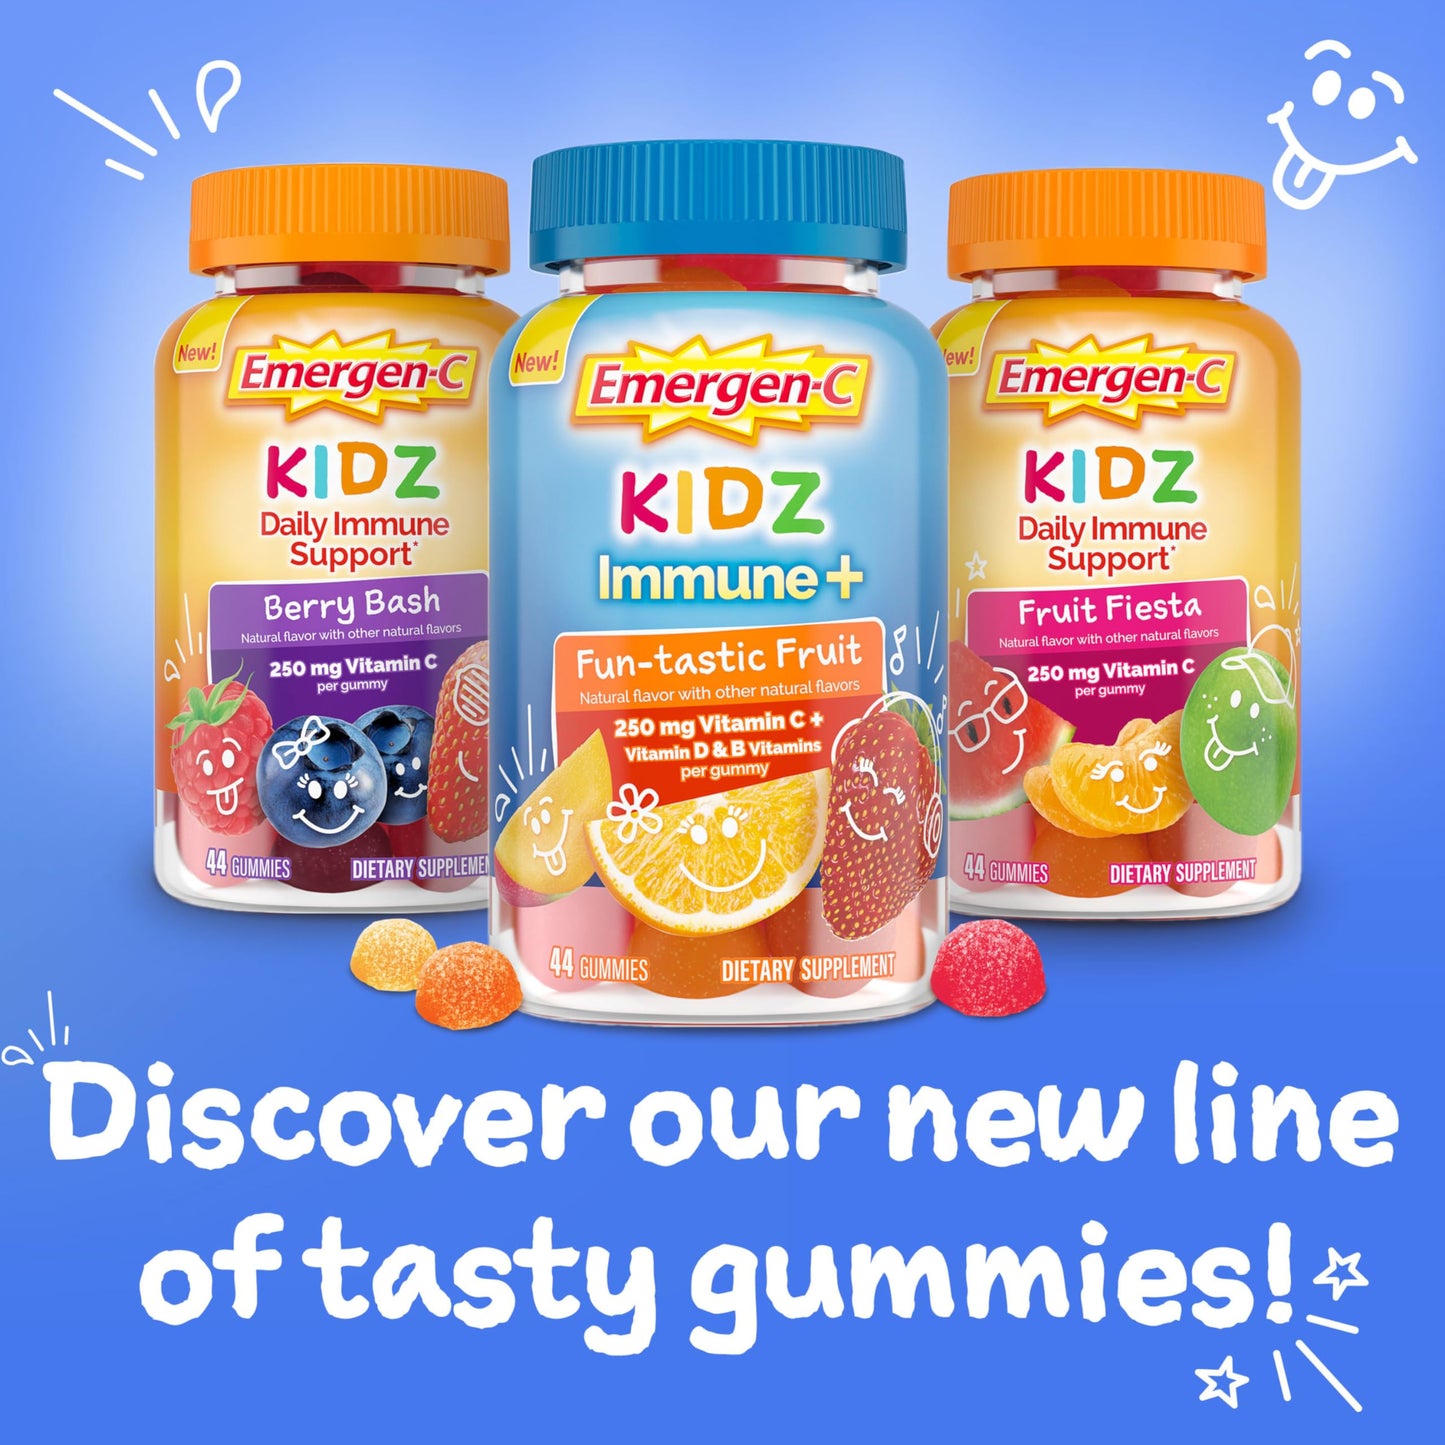 Emergen-C Kidz Immune+ Immune Support Dietary Supplements, Flavored Gummies with Vitamin C, B Vitamins and D for Support, Fun-Tastic Fruit - 44 Count